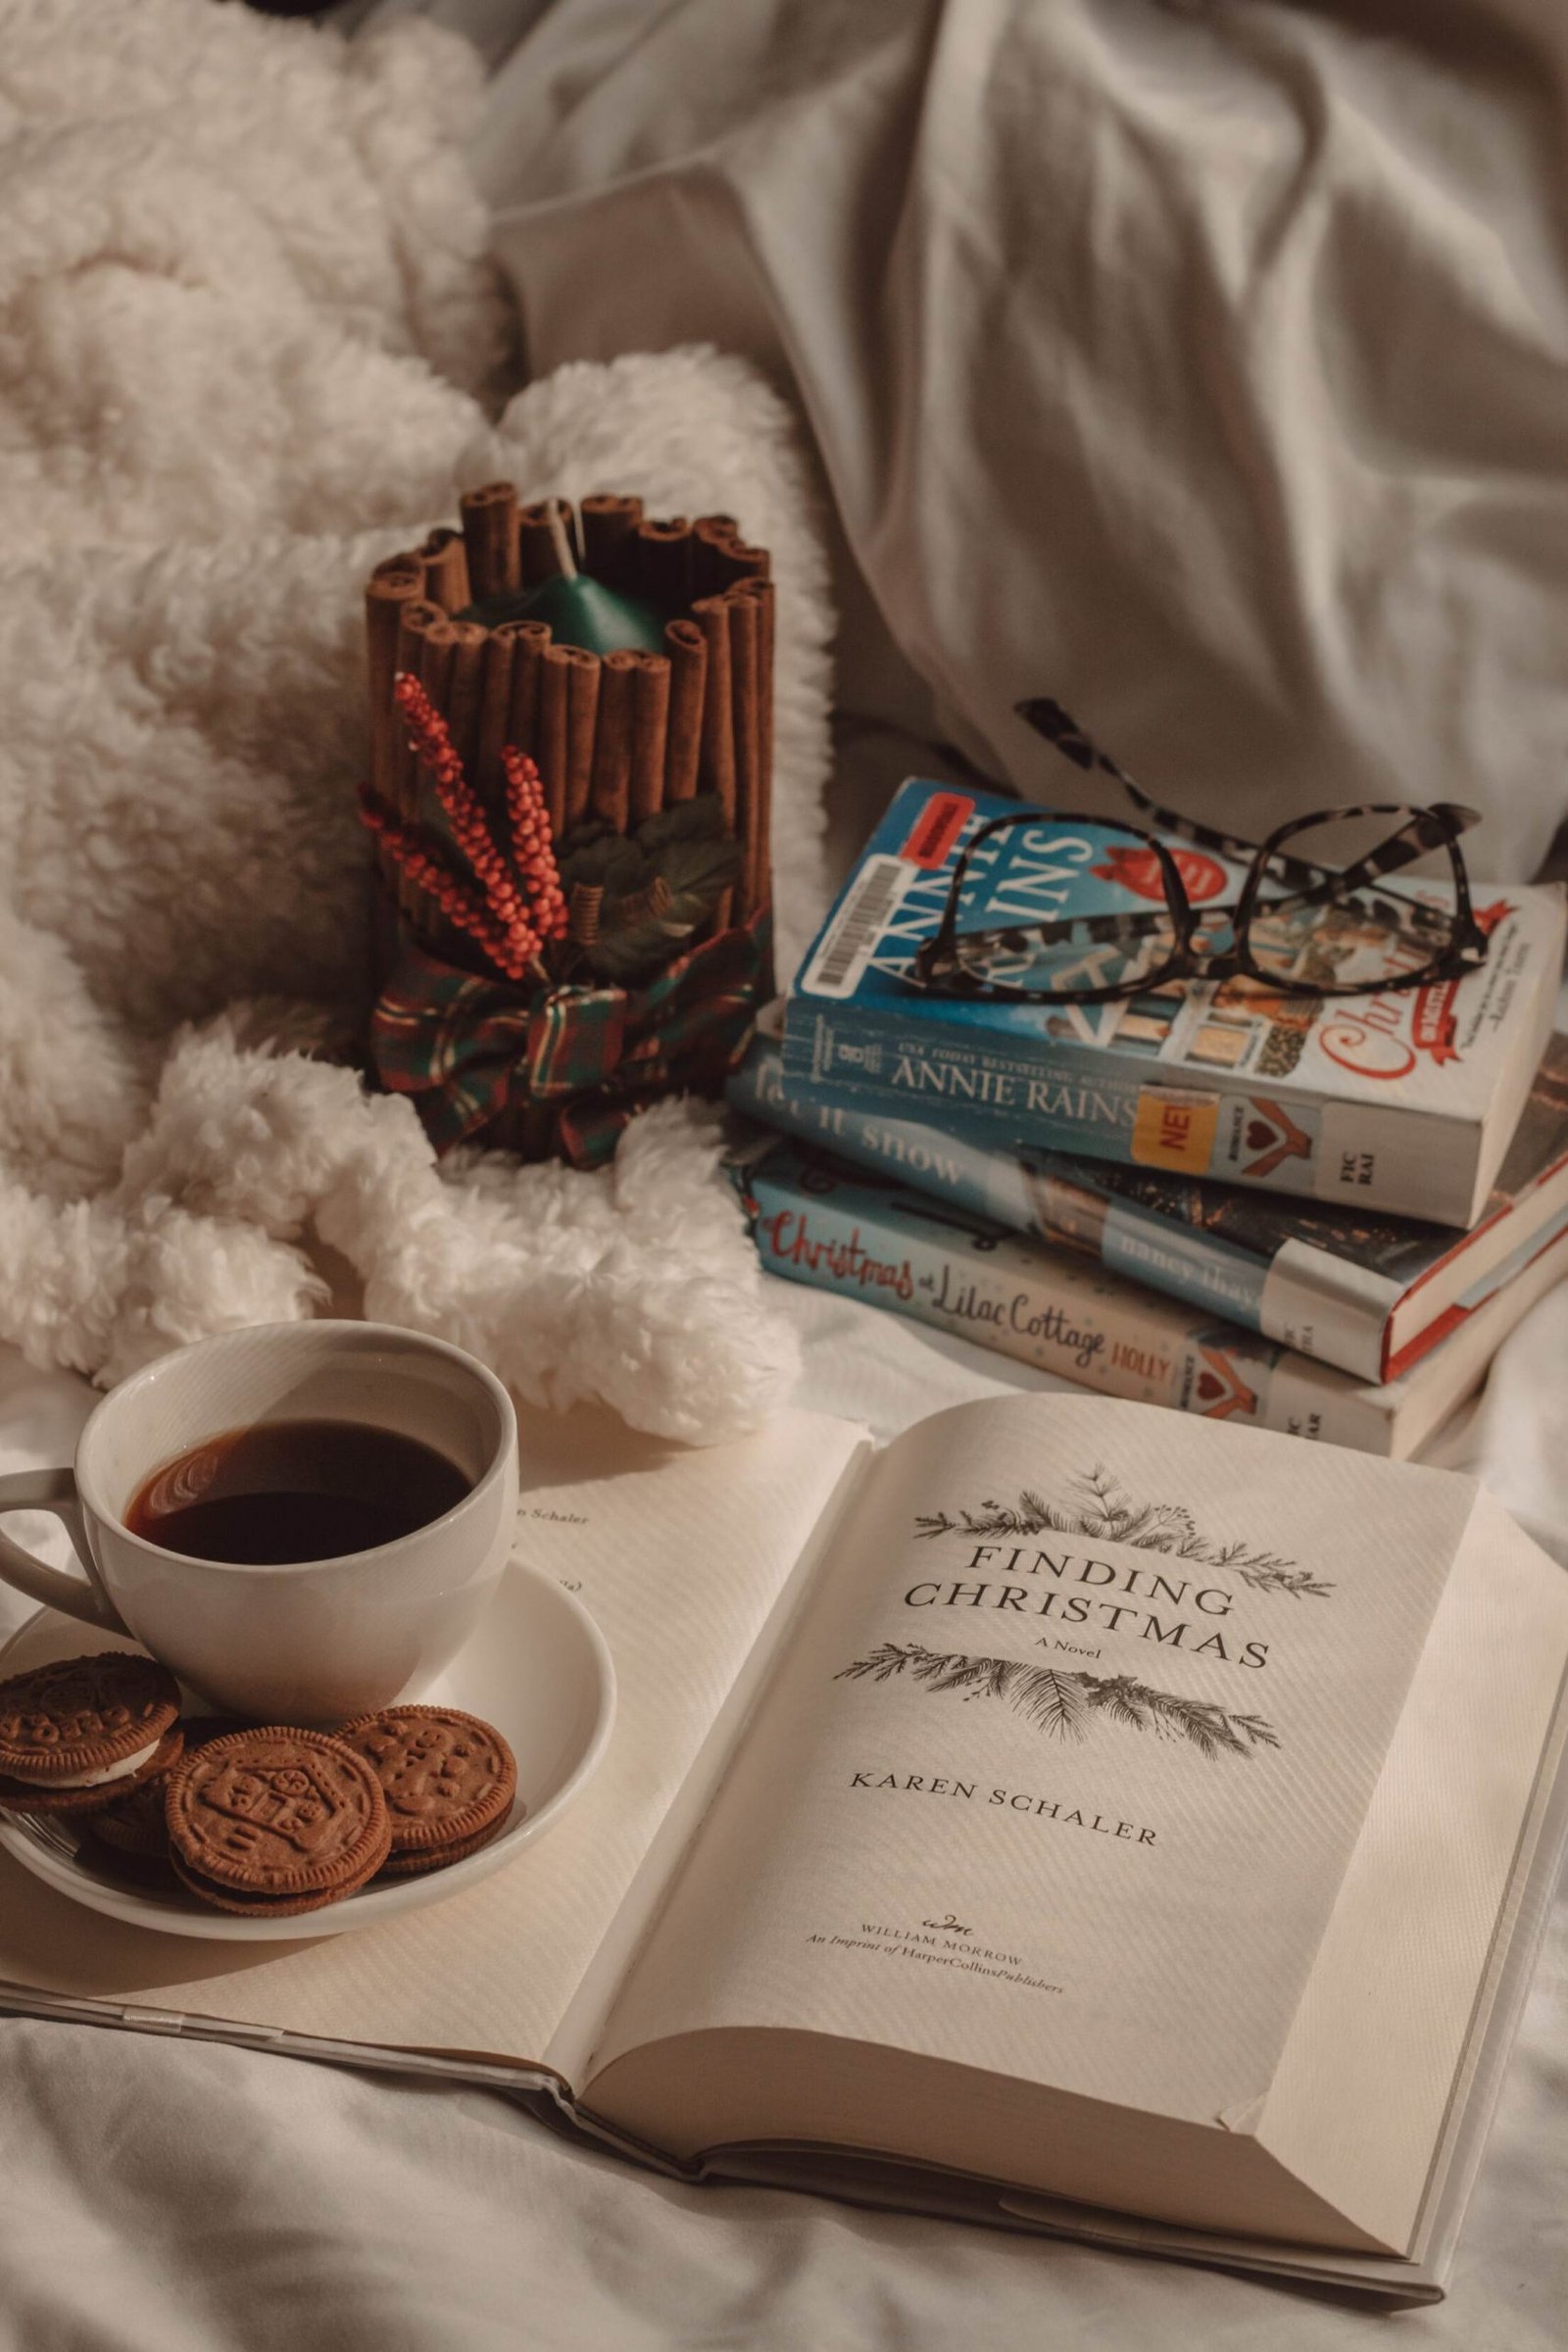 Why Finding Christmas Is the Perfect Holiday Book by The Espresso Edition cozy book and lifestyle blog